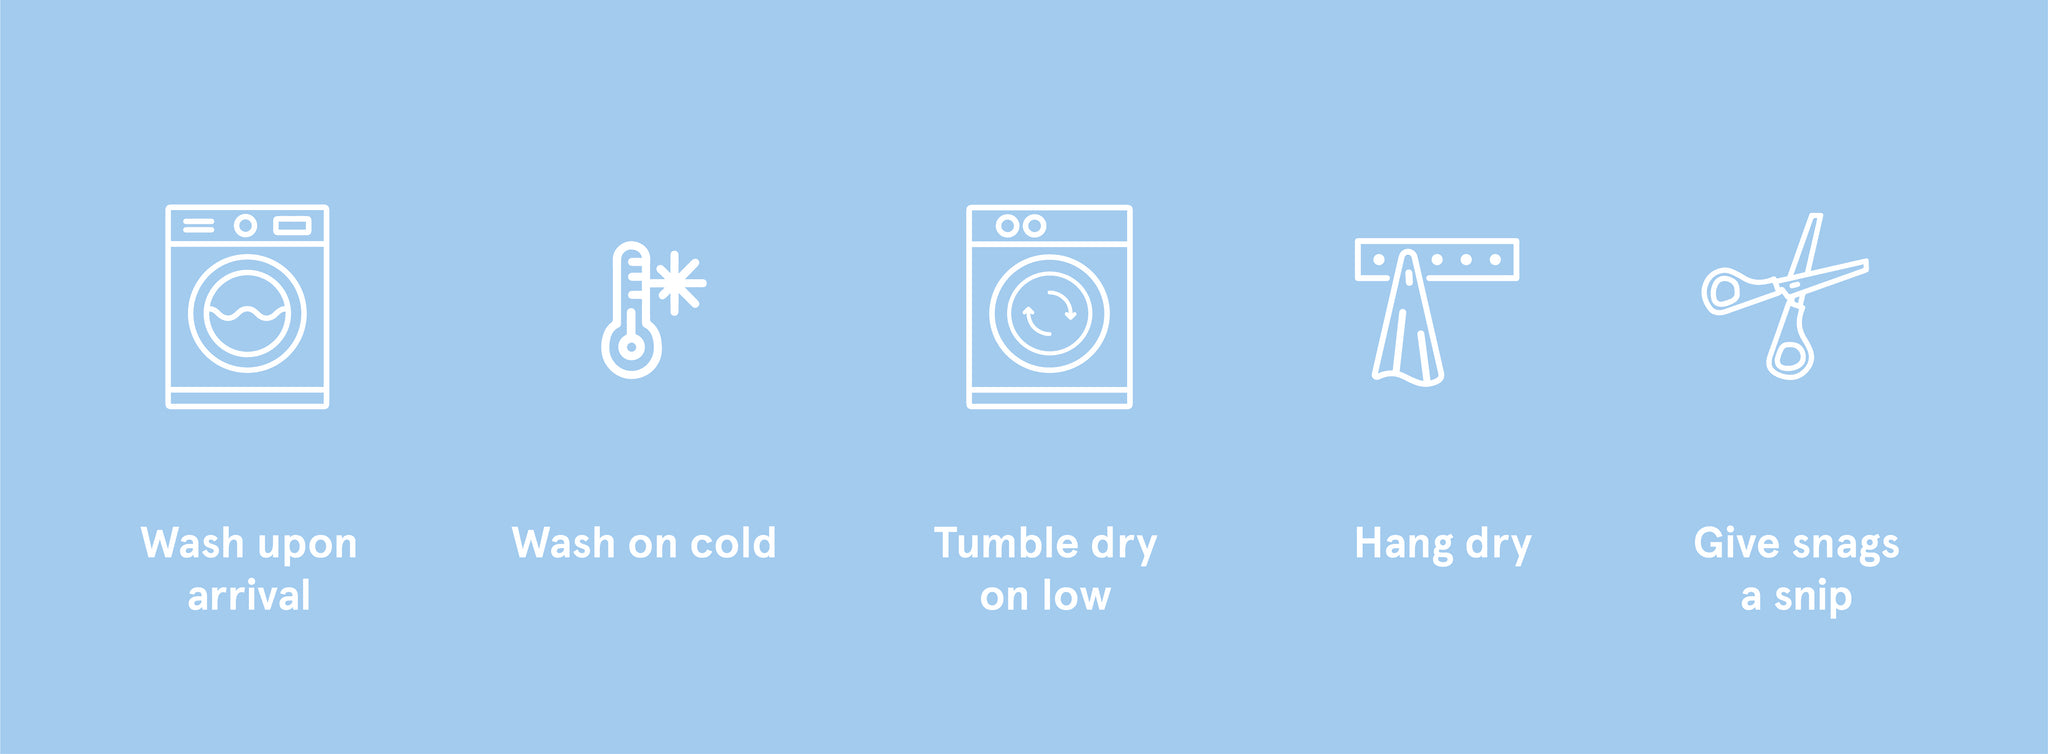 What is the best way to wash your towels?